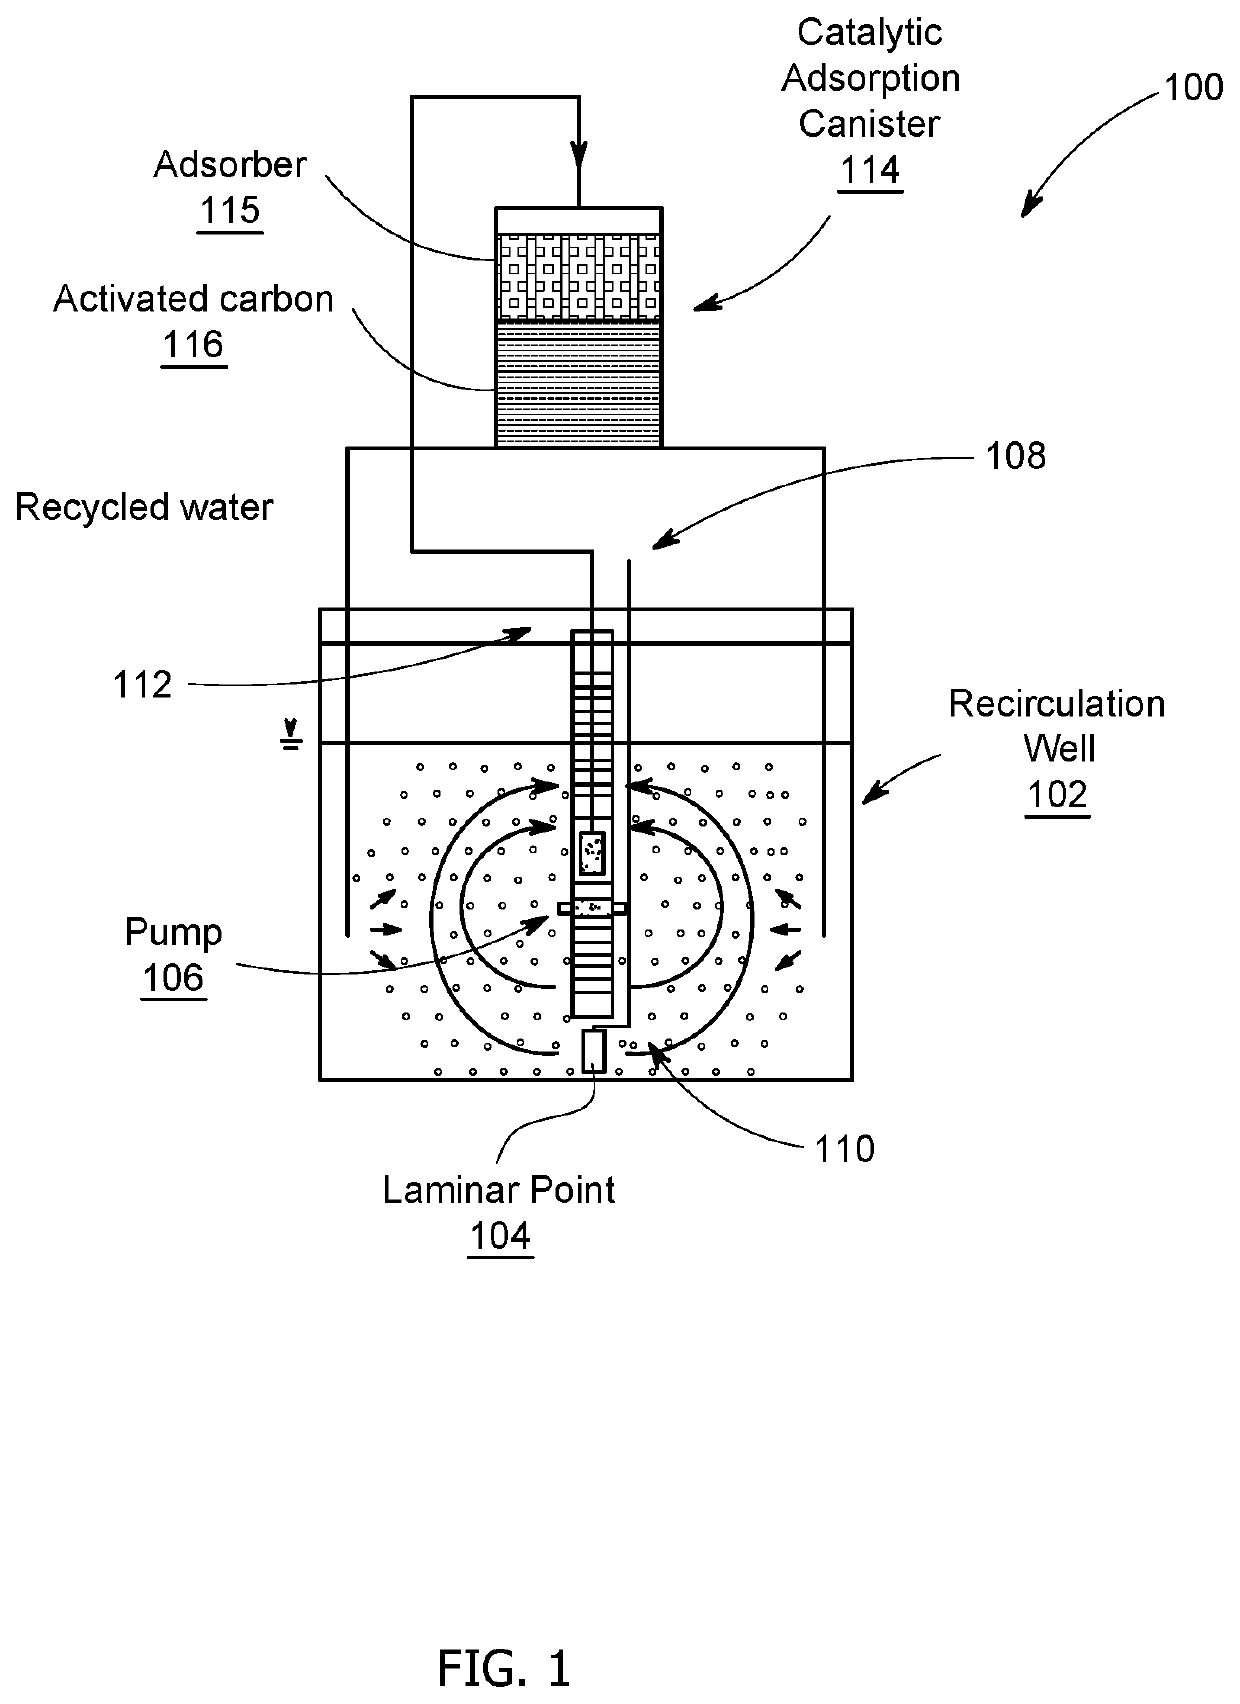 Method and apparatus for in-situ removal of per- and poly-fluoroalkyl substances